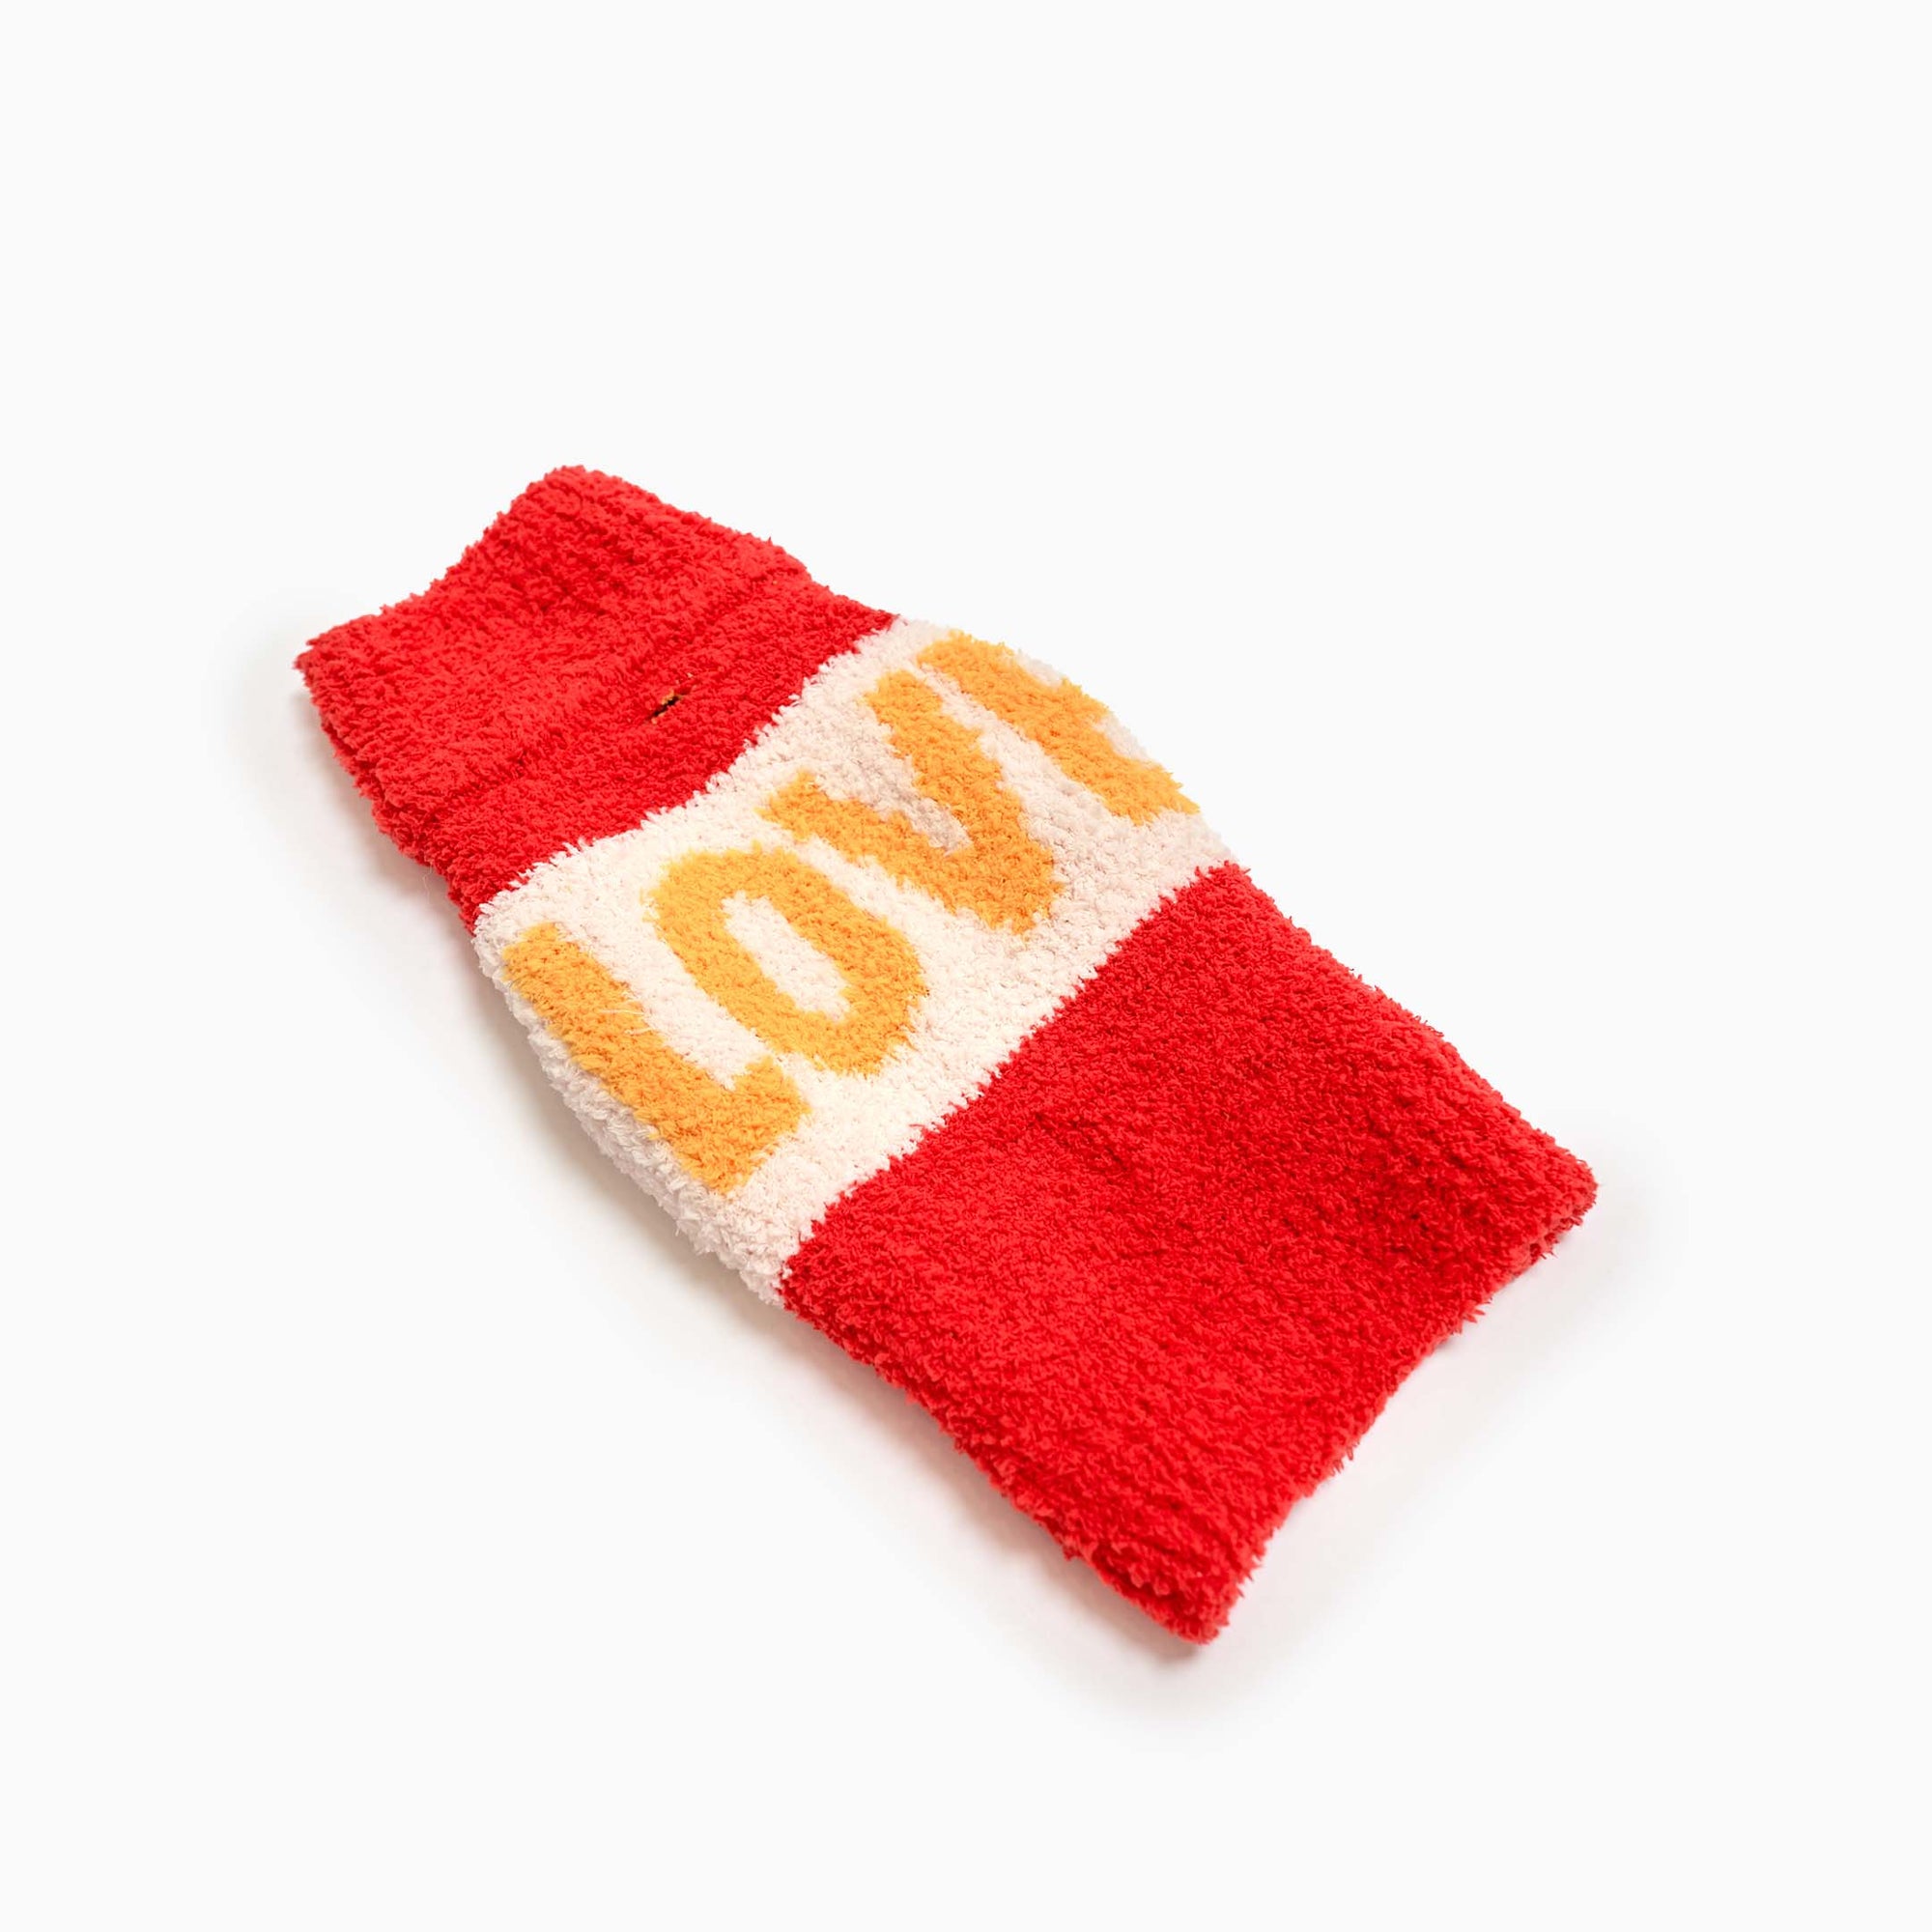 The image depicts a red dog sweater with a white and yellow "LOVE" design laid flat against a white background. The sweater's bright colors and heartfelt message suggest it's not only functional for keeping a pet warm but also serves as a cute, expressive garment for a beloved dog. The design is simple yet eye-catching, suitable for a pet owner who enjoys adding a splash of color and personality to their dog's wardrobe.